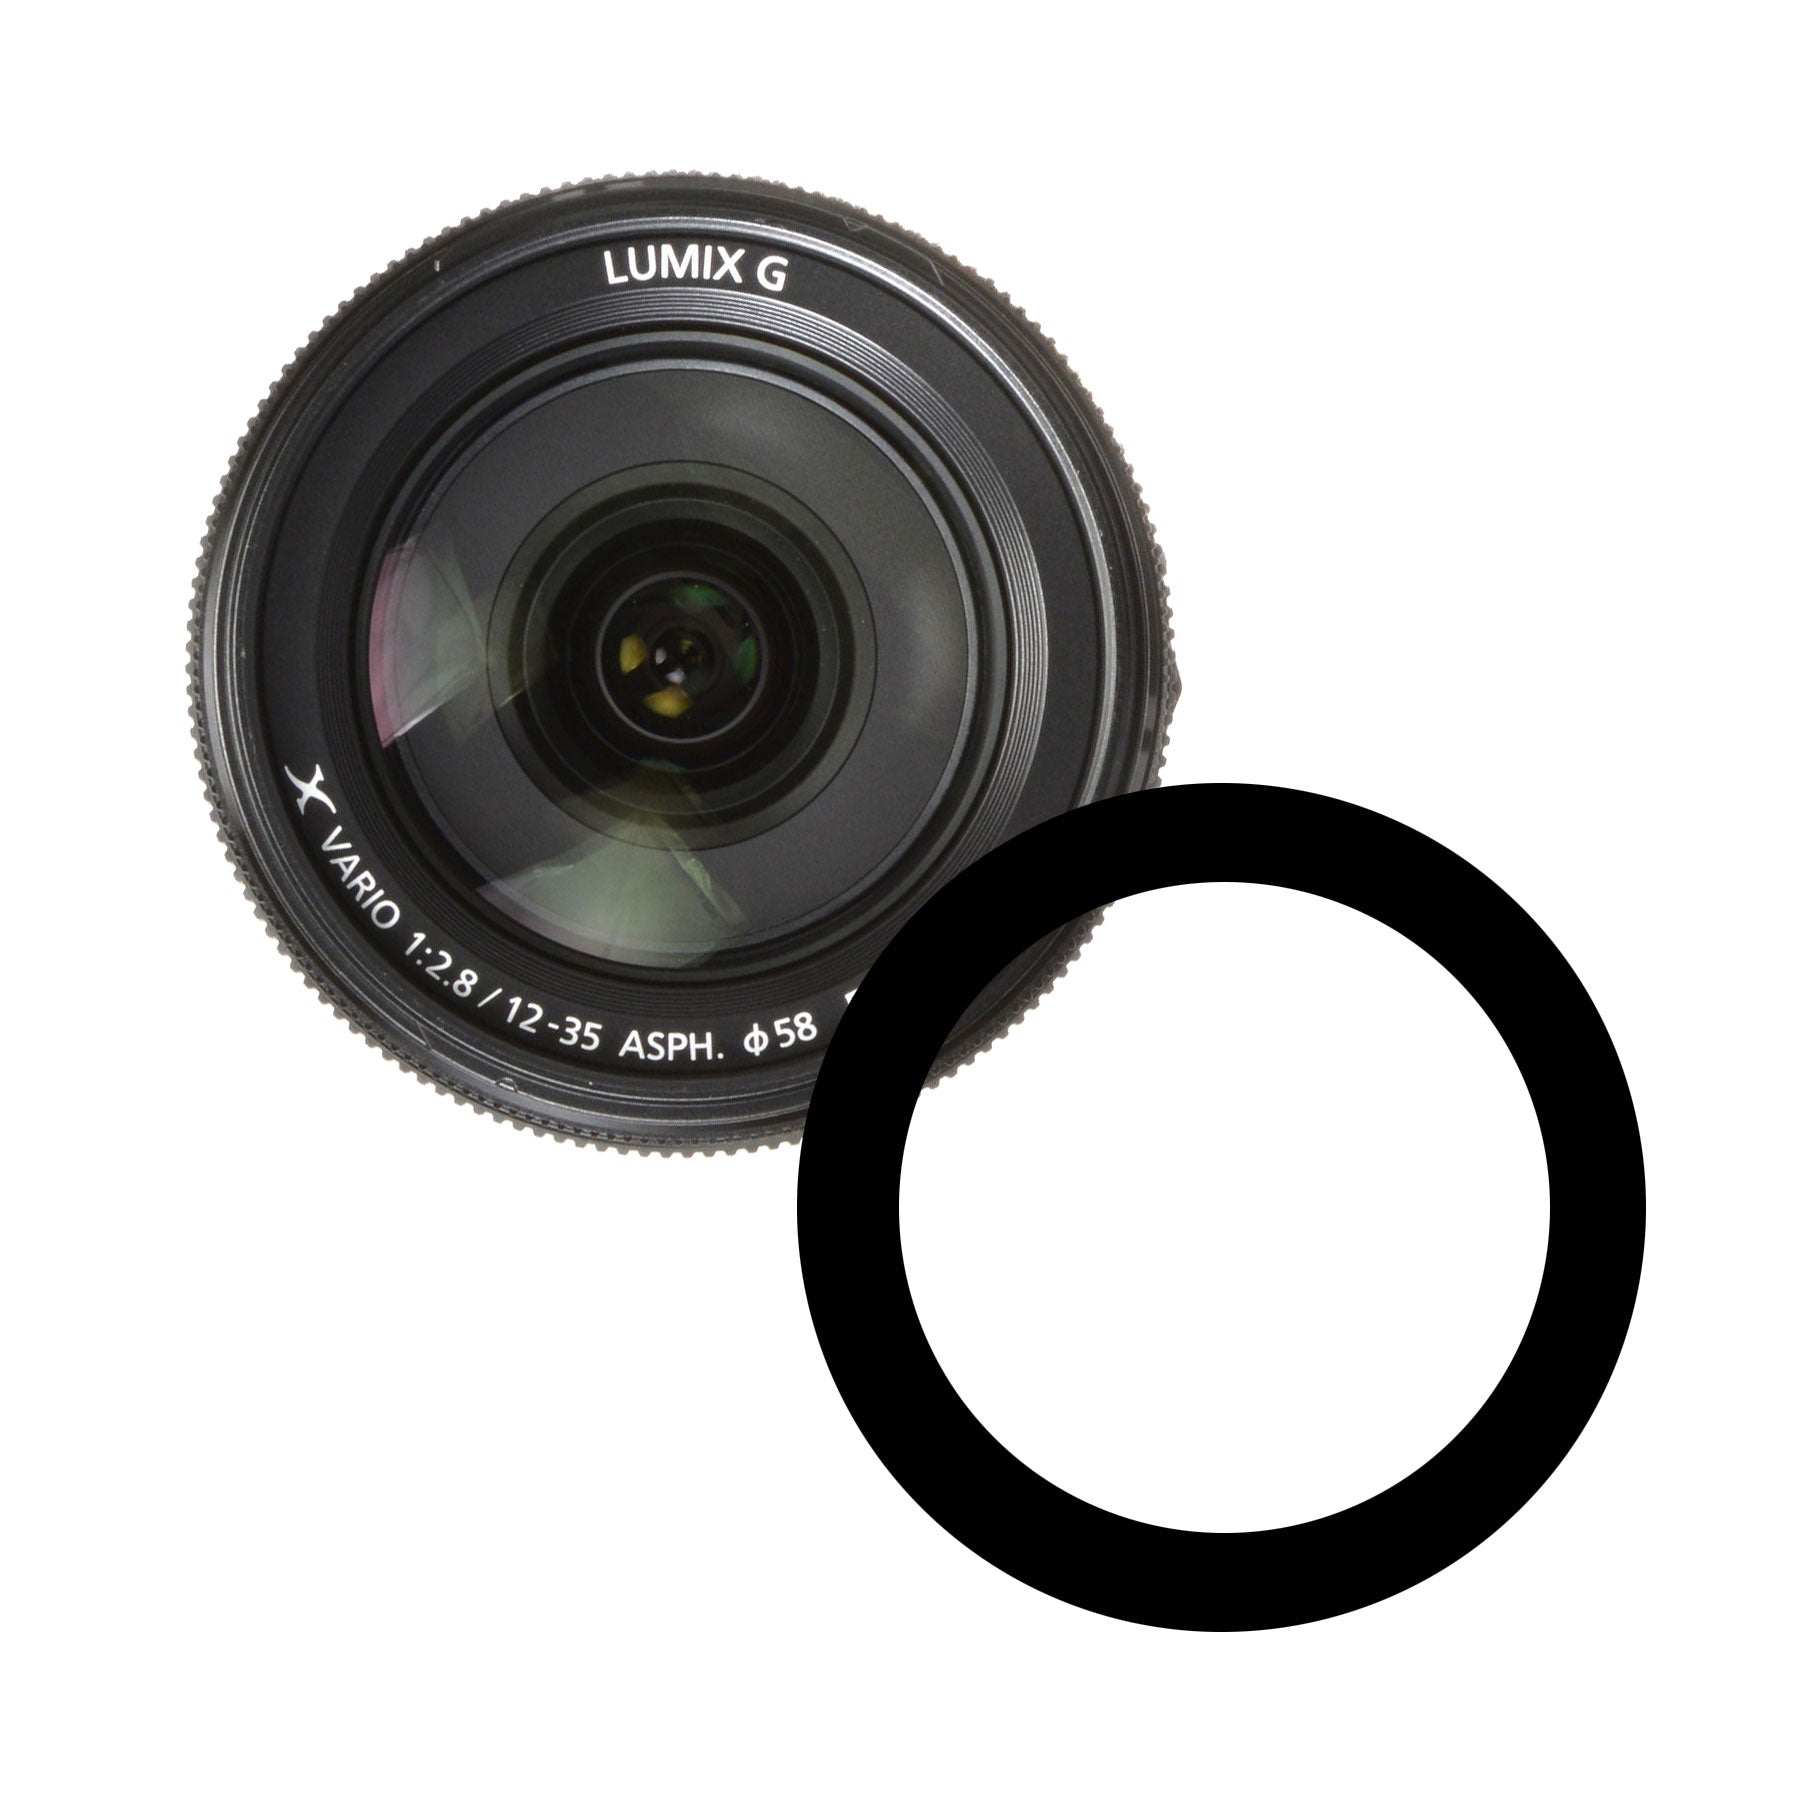 Anti-Reflection Ring for Panasonic 12-35mm F2.8 I or II ASPH Power OIS